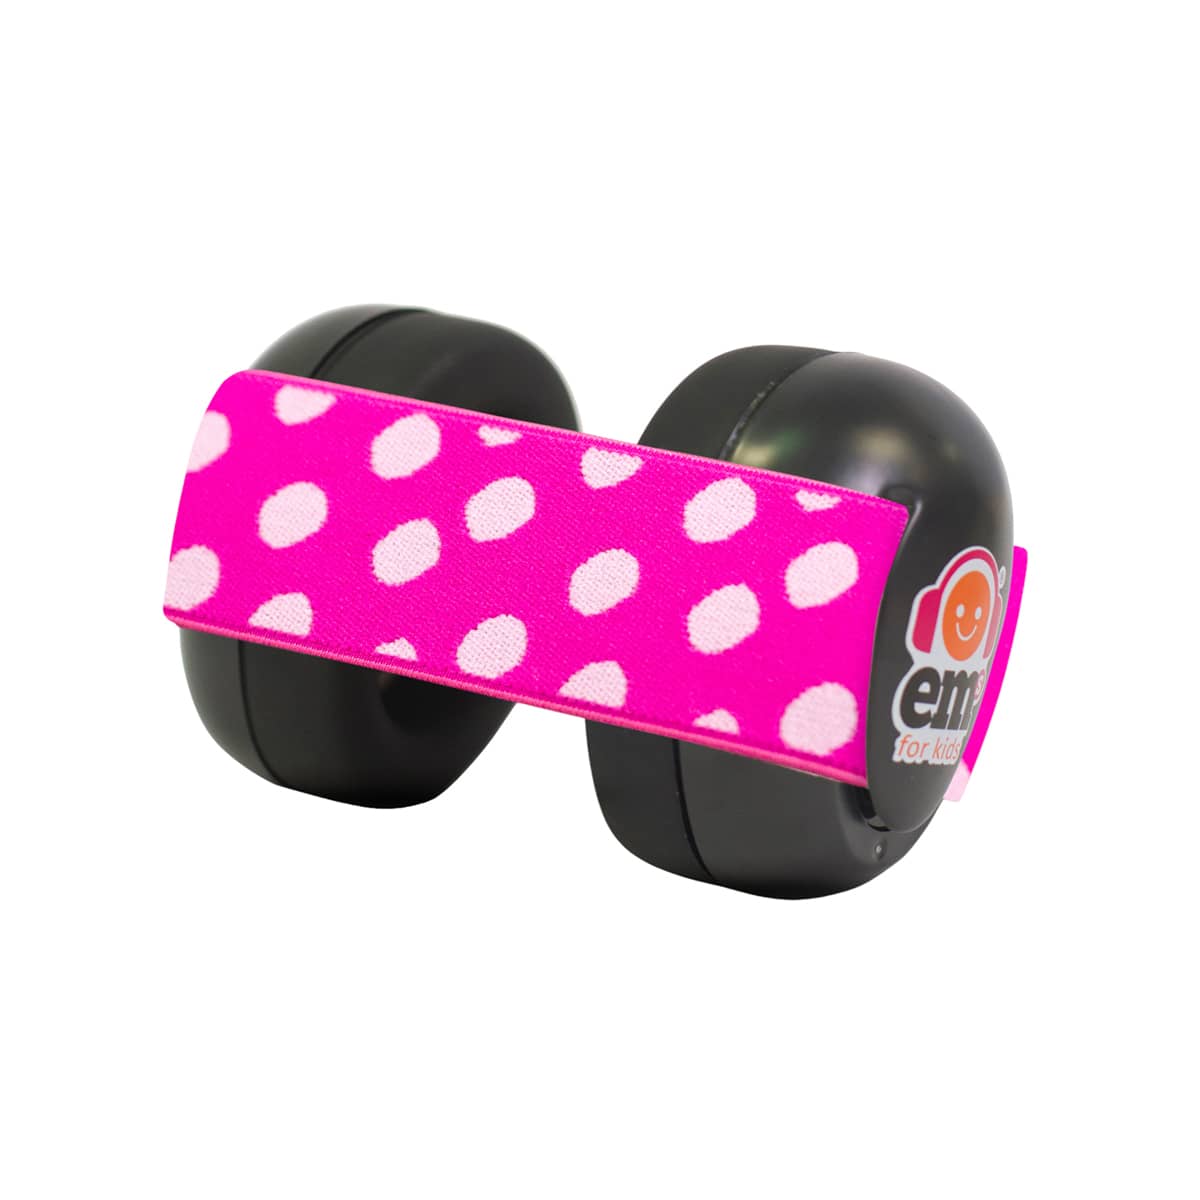 Ems for Kids Baby Earmuffs - Black with Pink and White Headband